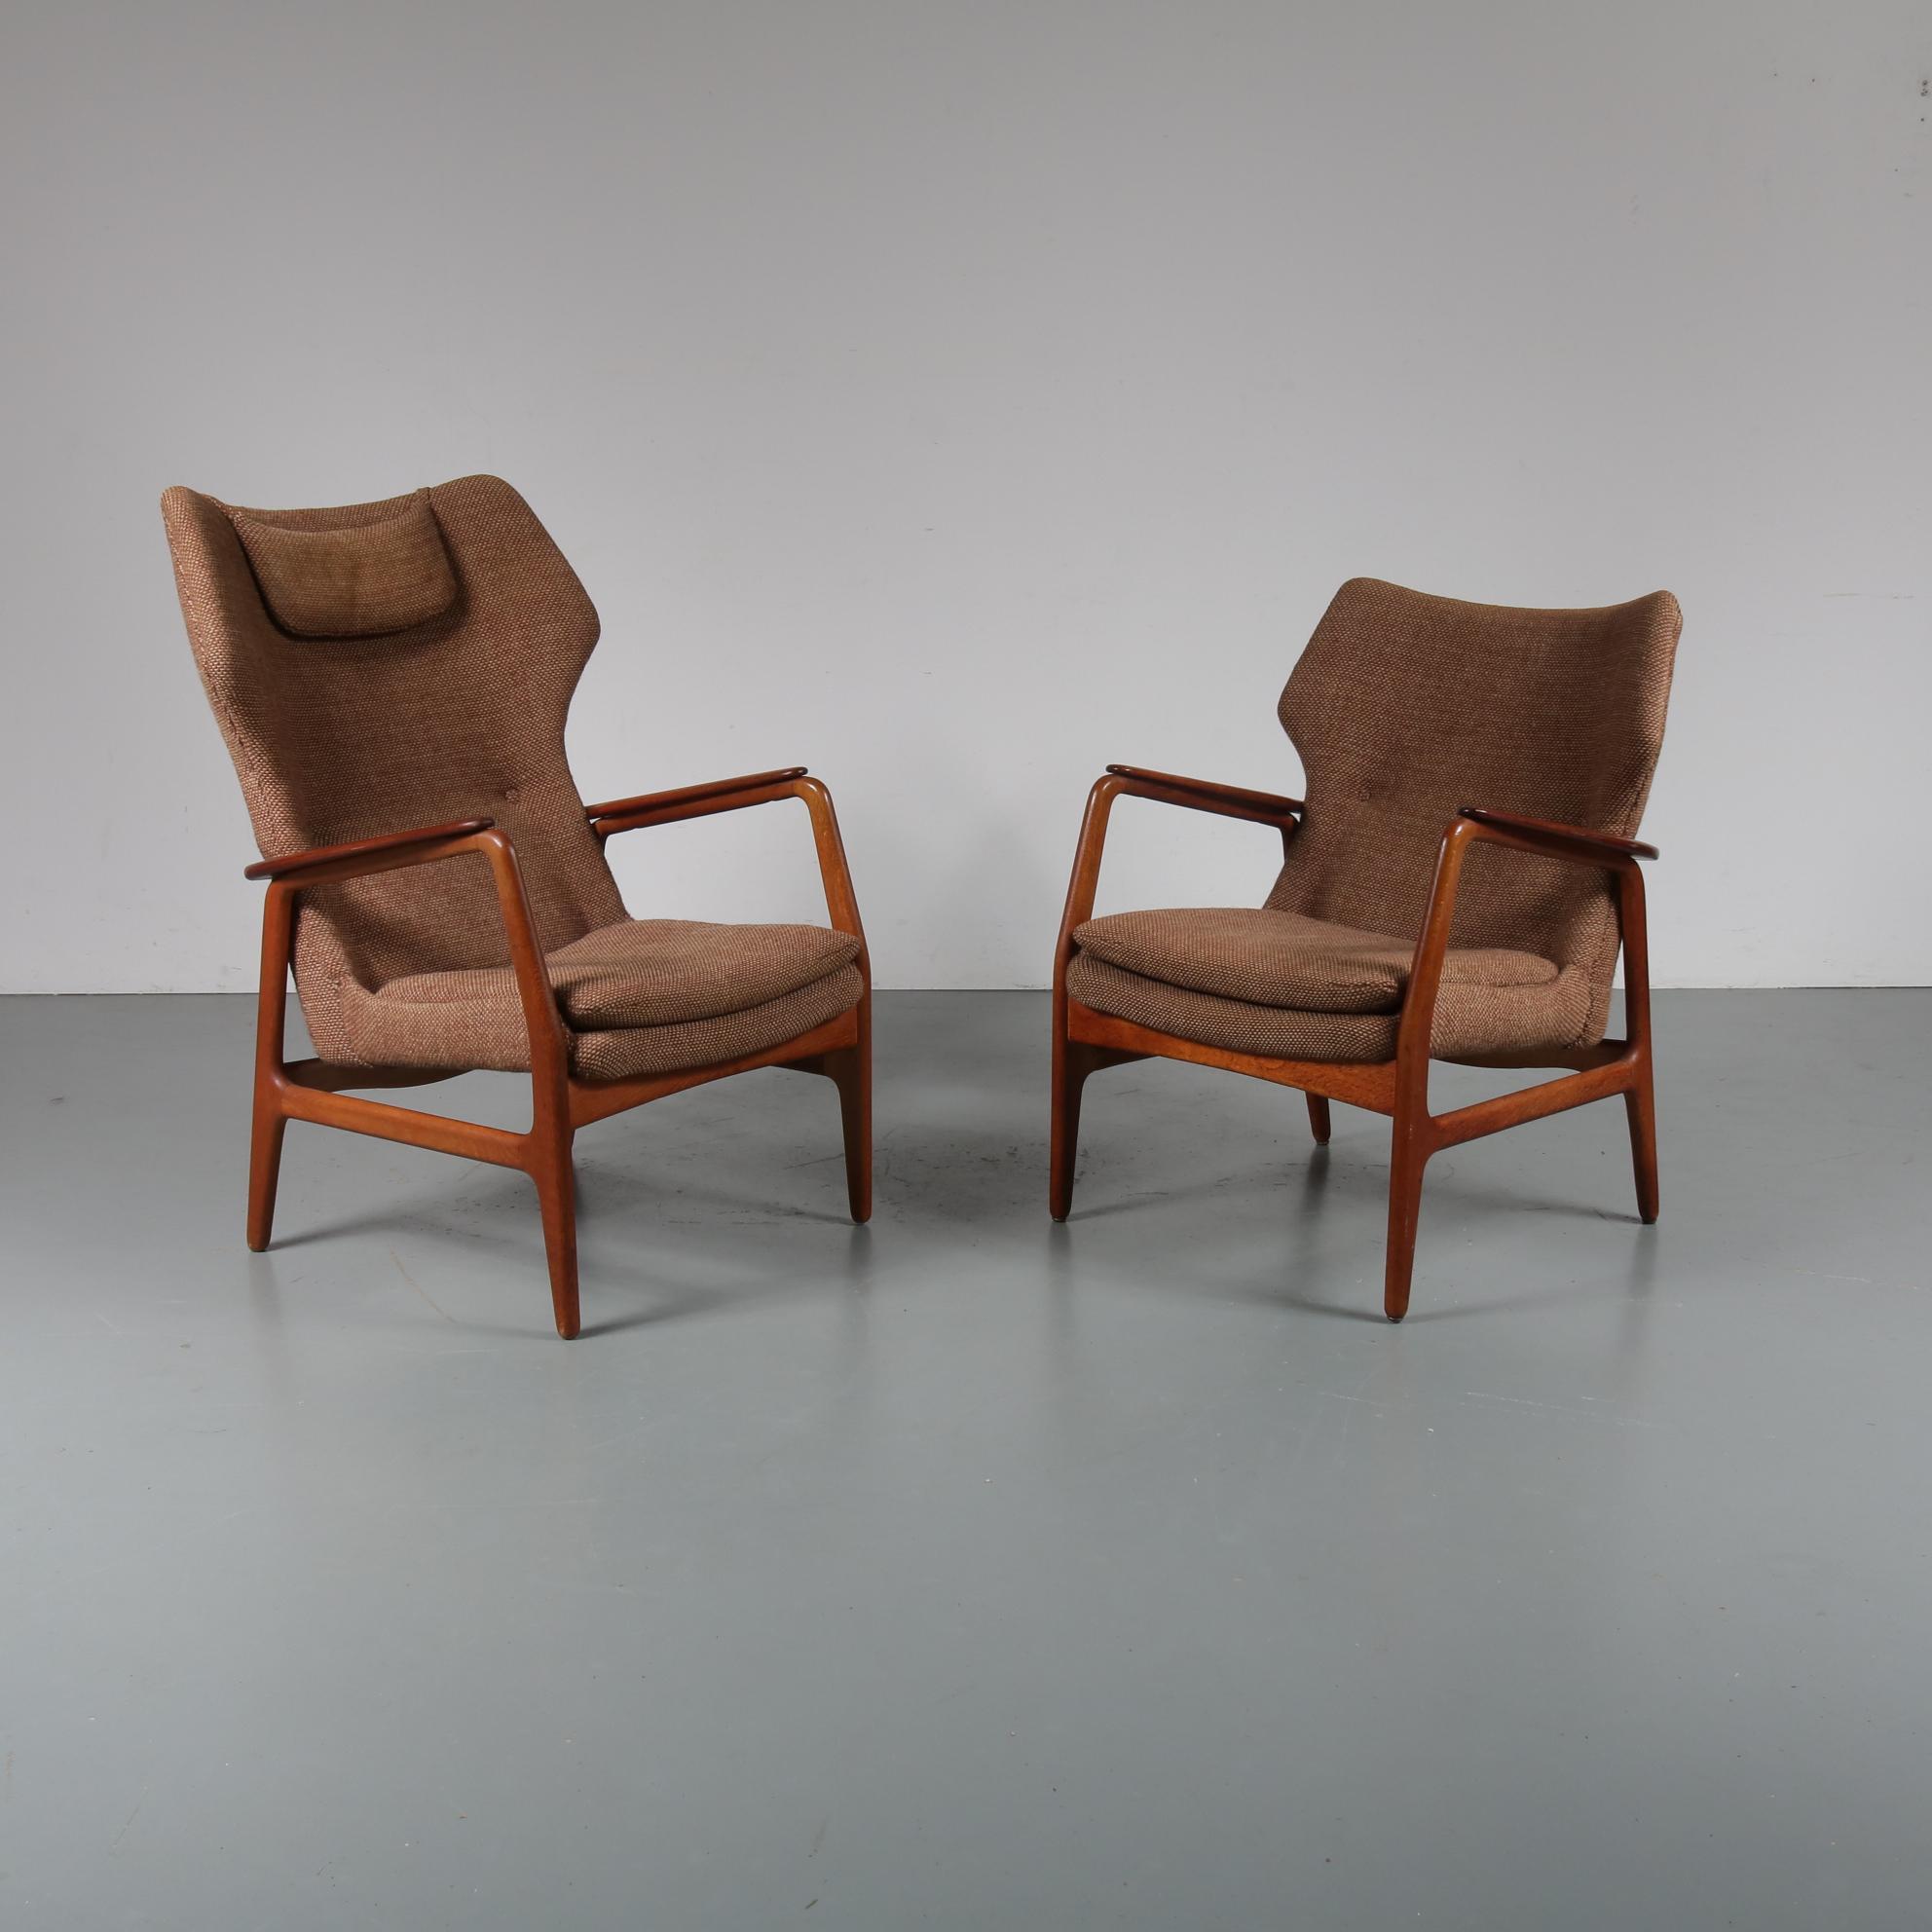 Stunning set of two Bovenkamp easy chairs designed by Aksel Bender Madsen and manufactured by Bovenkamp, circa 1950.

The set contains one highback (97 cm) and one lowback (82 cm) 